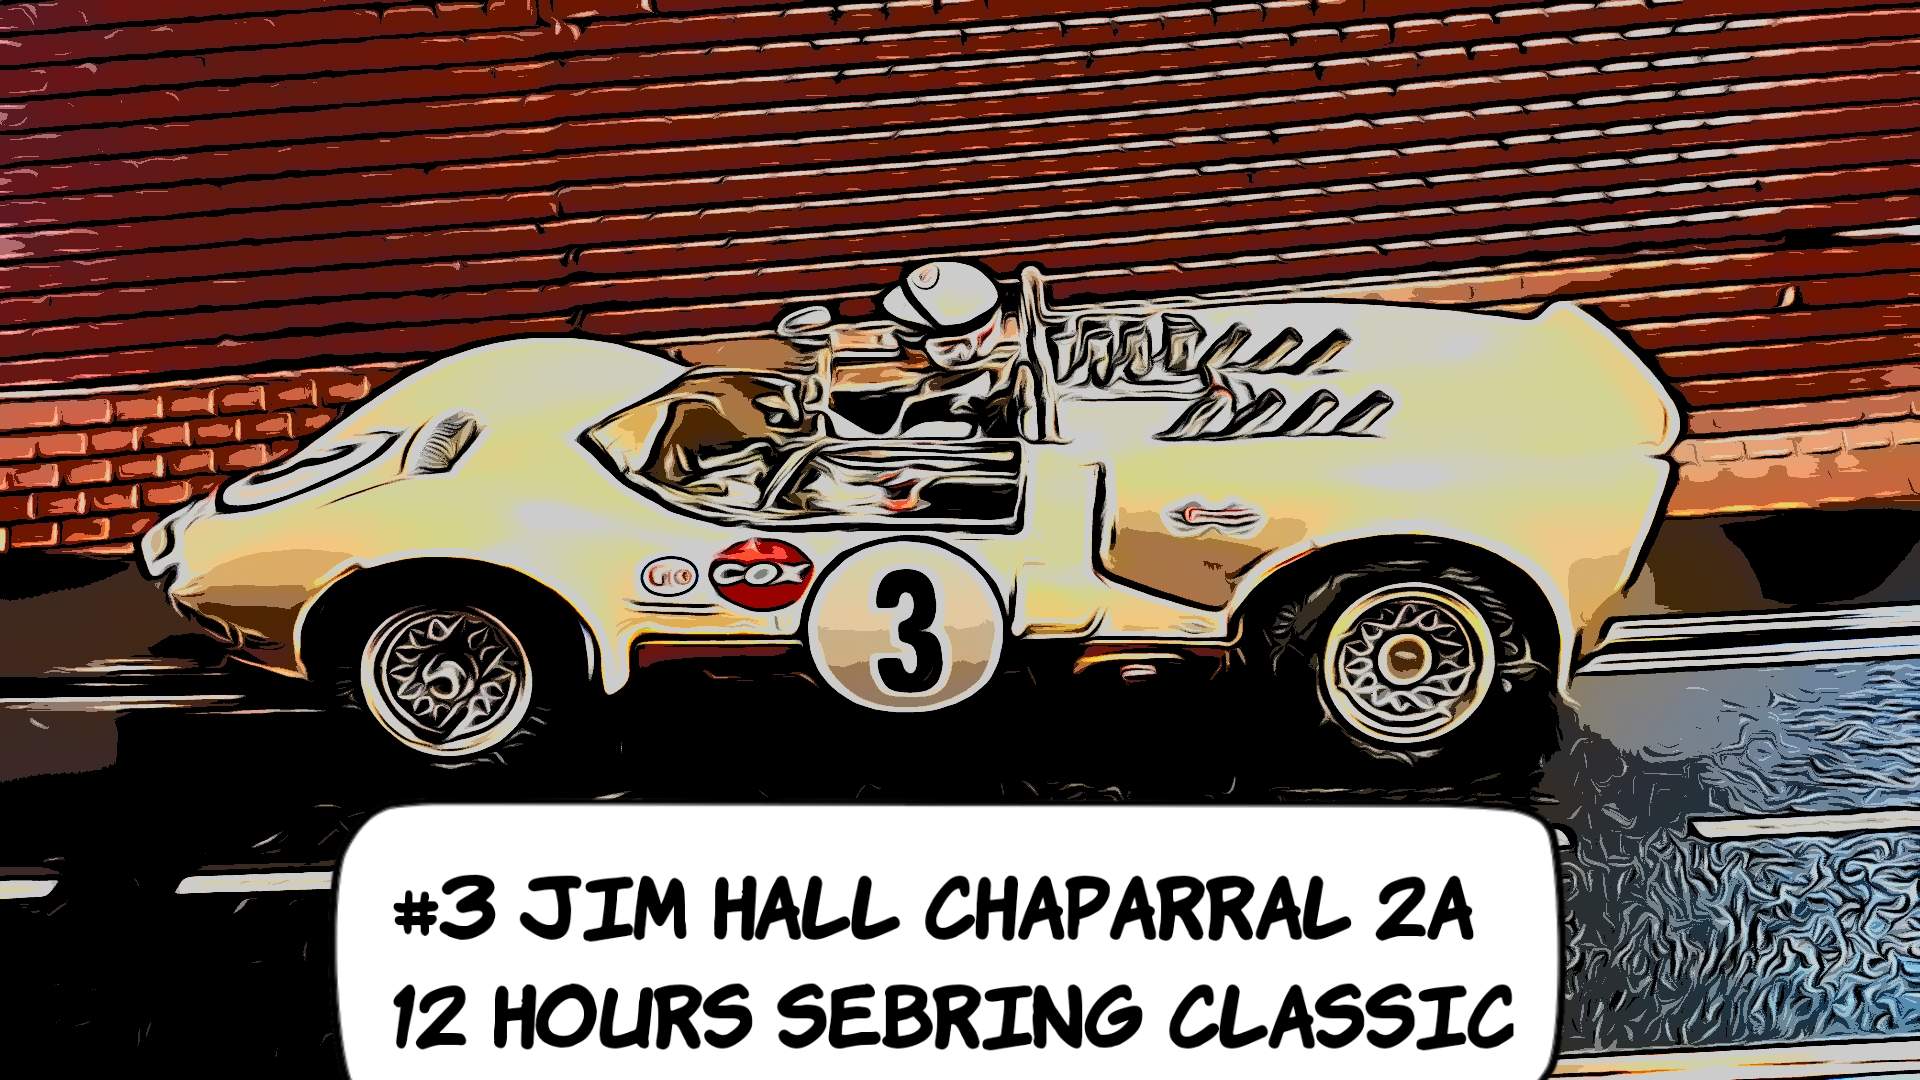 * Black Friday Super Sale, Save $80 off vs our $299.99 Ebay Store * COX Chaparral 2A Jim Hall Sebring 12 Hours Racer 1/24 Scale Slot Car 3 (Traditional Jim Hall 12 Hours of Sebring Livery)